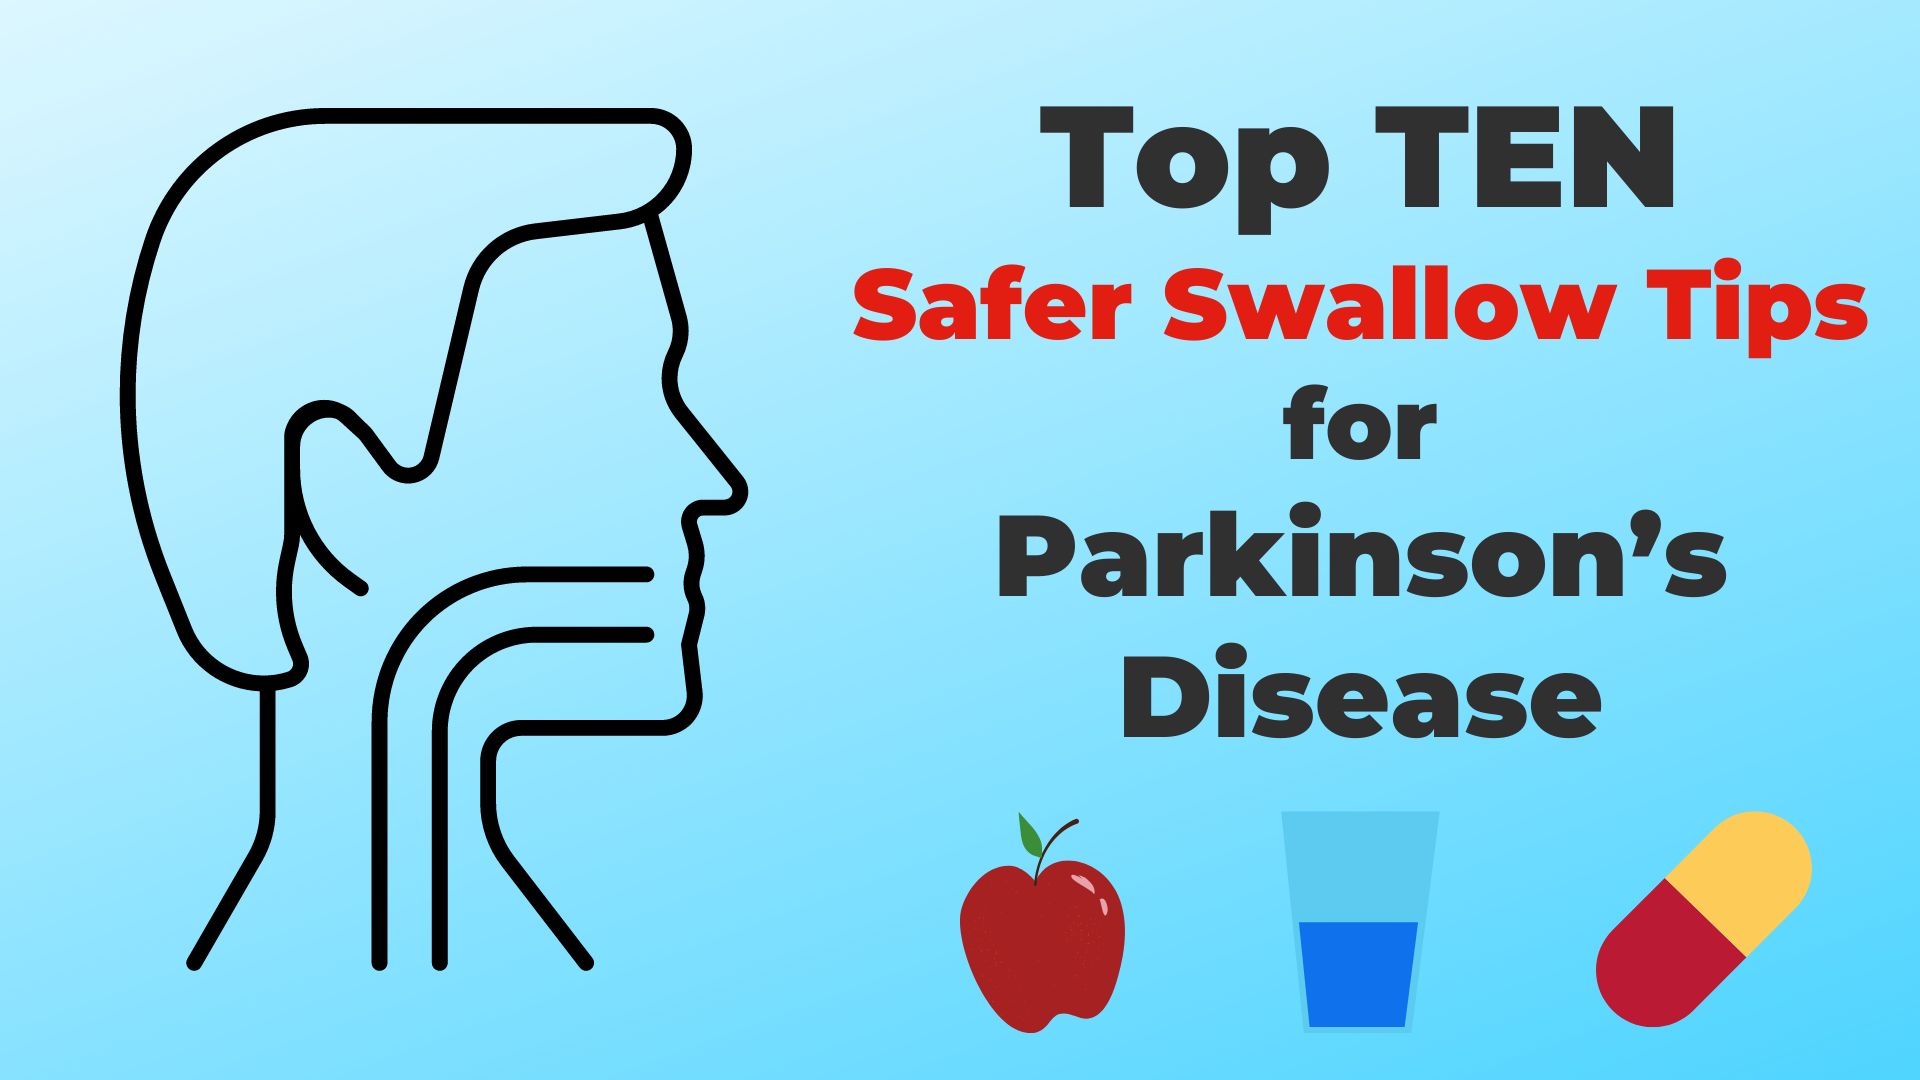 Safe swallowing strategies for Parkinson's disease dysphagia, top tips and safe swallowing strategies for Parkinson's disease, difficulty swallowing, swallow impairment, choking